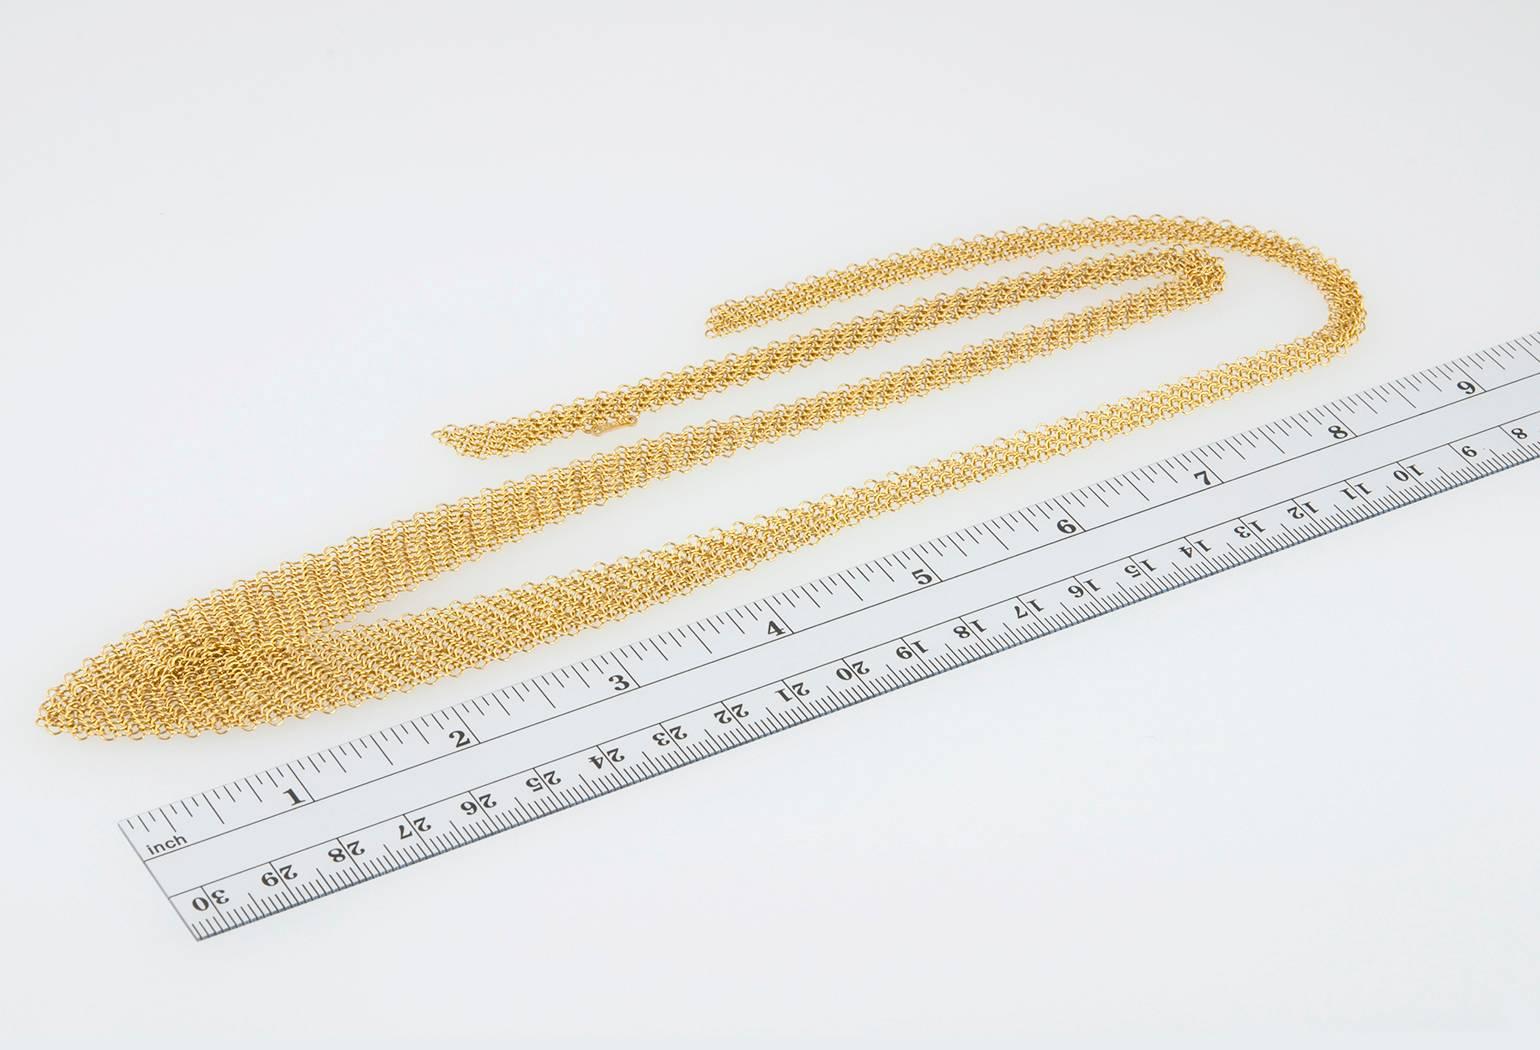 Tiffany and Co. Elsa Peretti mesh bib necklace in 18 karat yellow gold. A chic design by Peretti that is both classic and cool with a malleable form to drape in different ways around the neck.  Circa 1990s.

Necklace is approximately 26 inches in